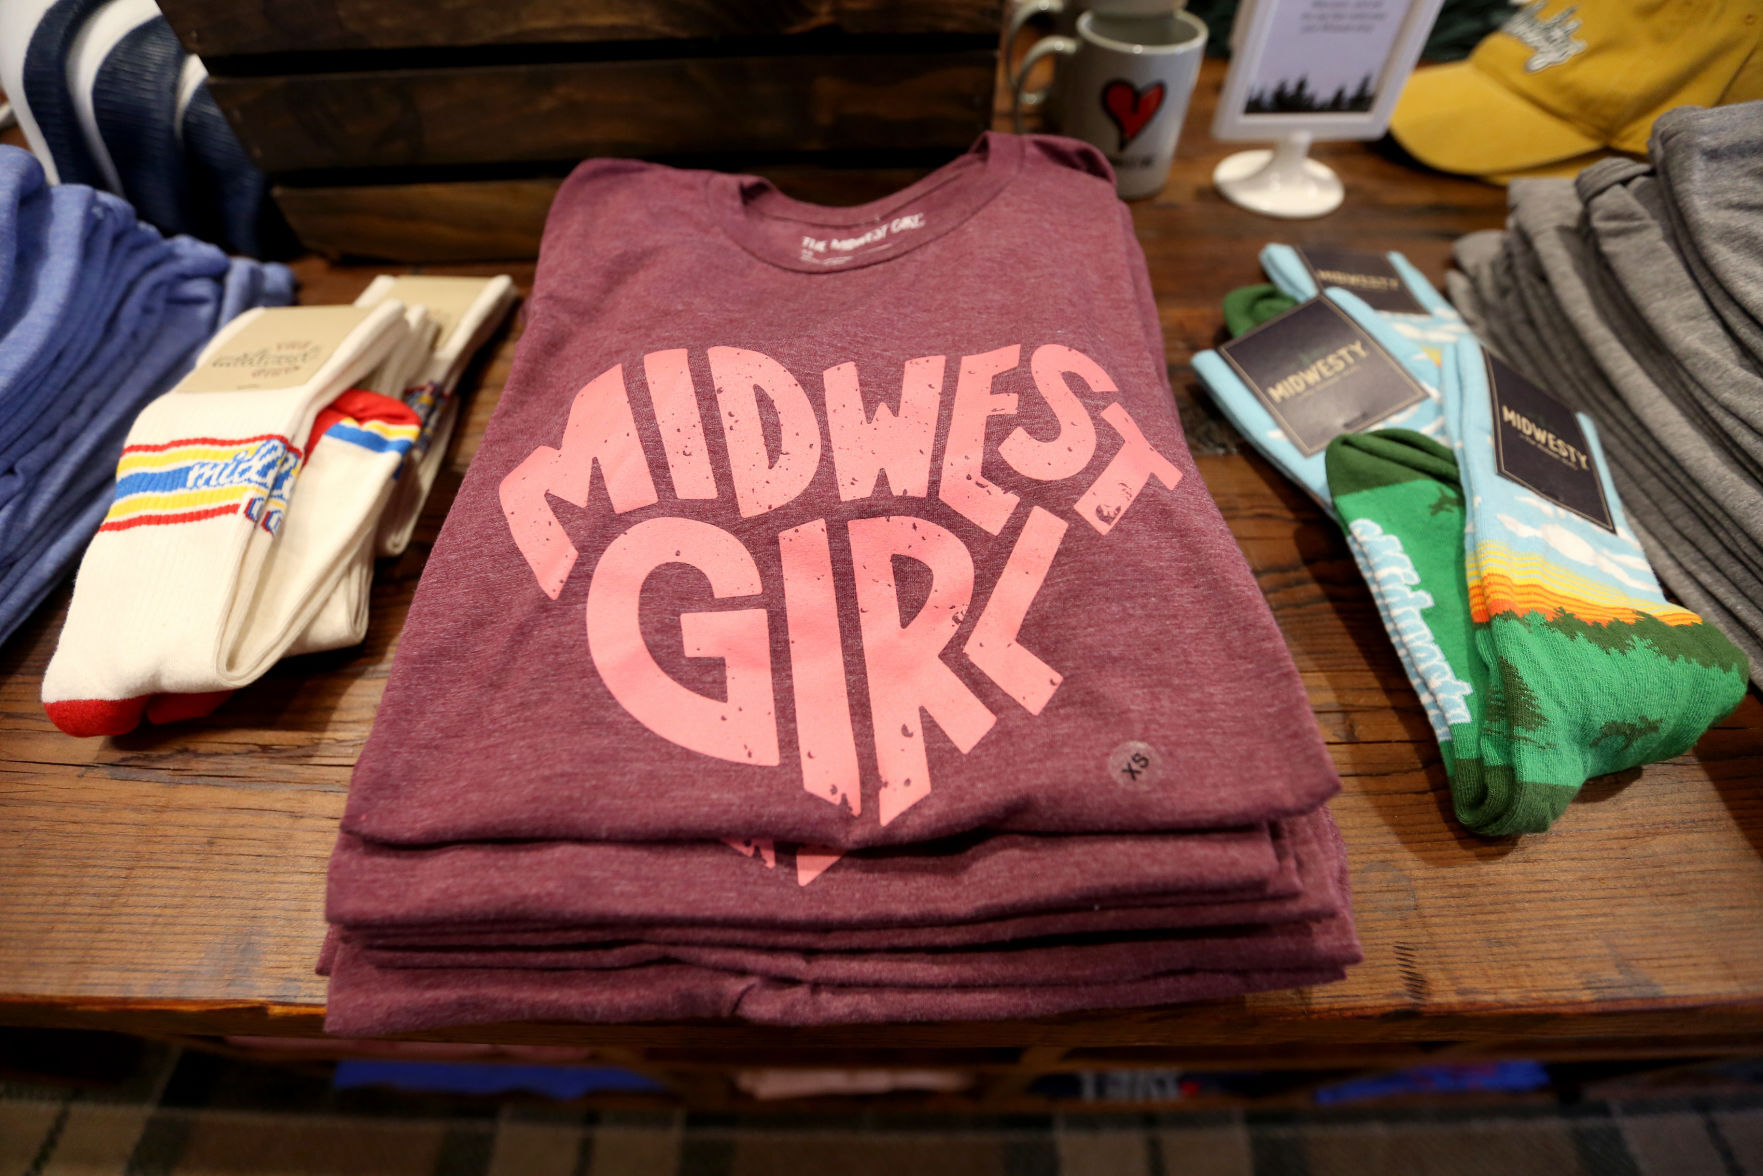 Merchandise is displayed at The Midwest Girl in Dubuque last year. PHOTO CREDIT: JESSICA REILLY